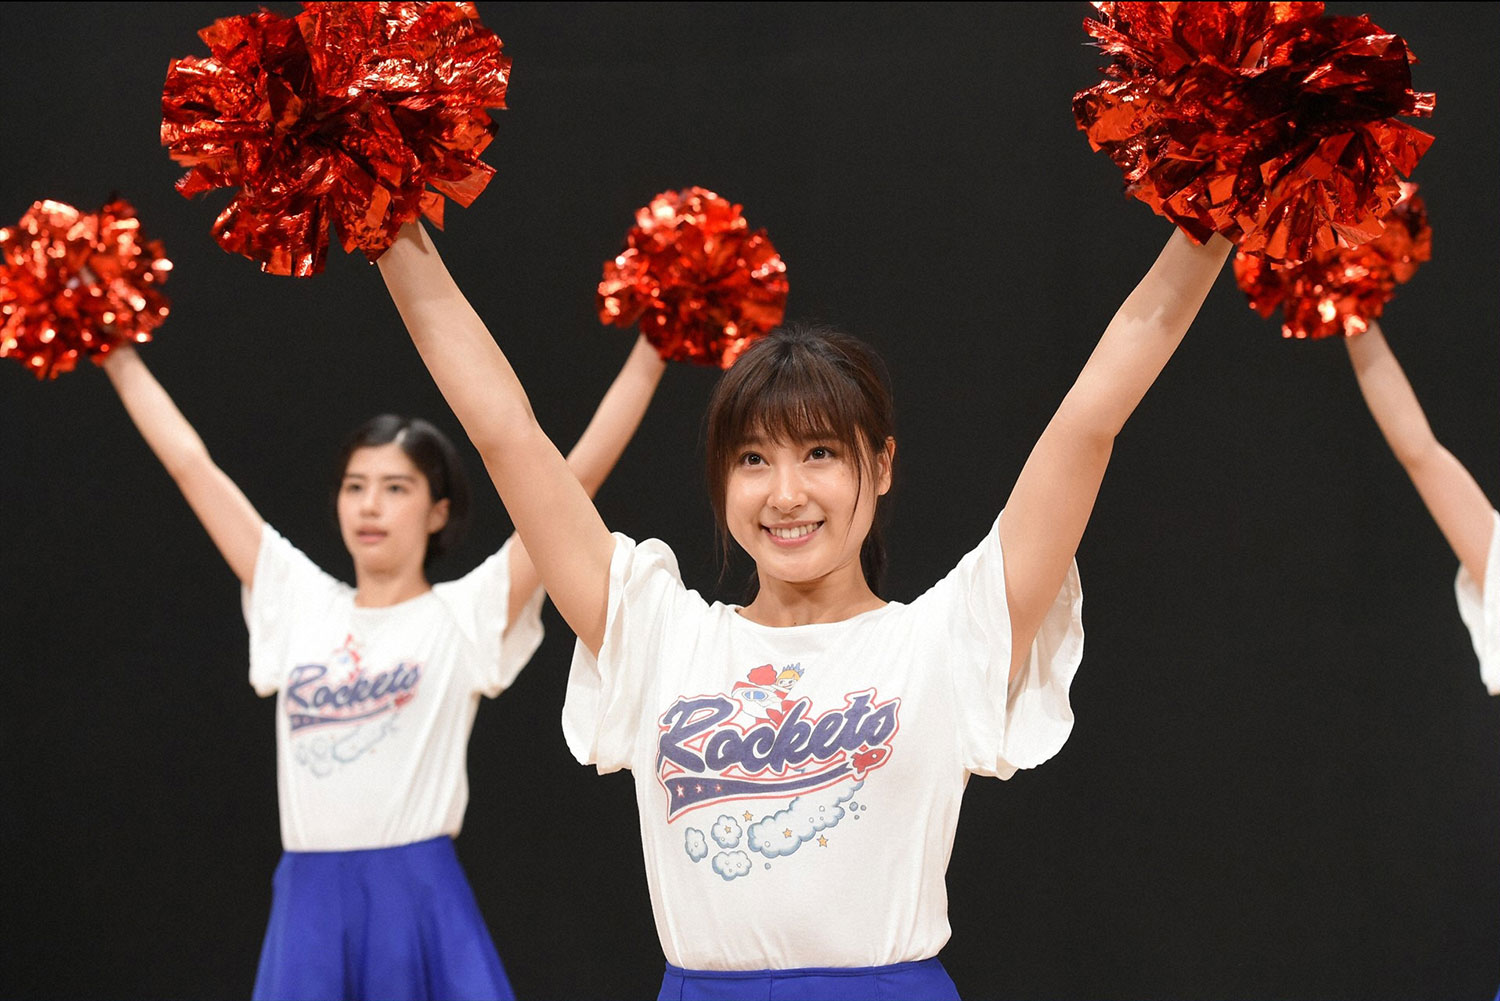 We Are Rockets!,チア☆ダン,치어댄스,青春后空翻